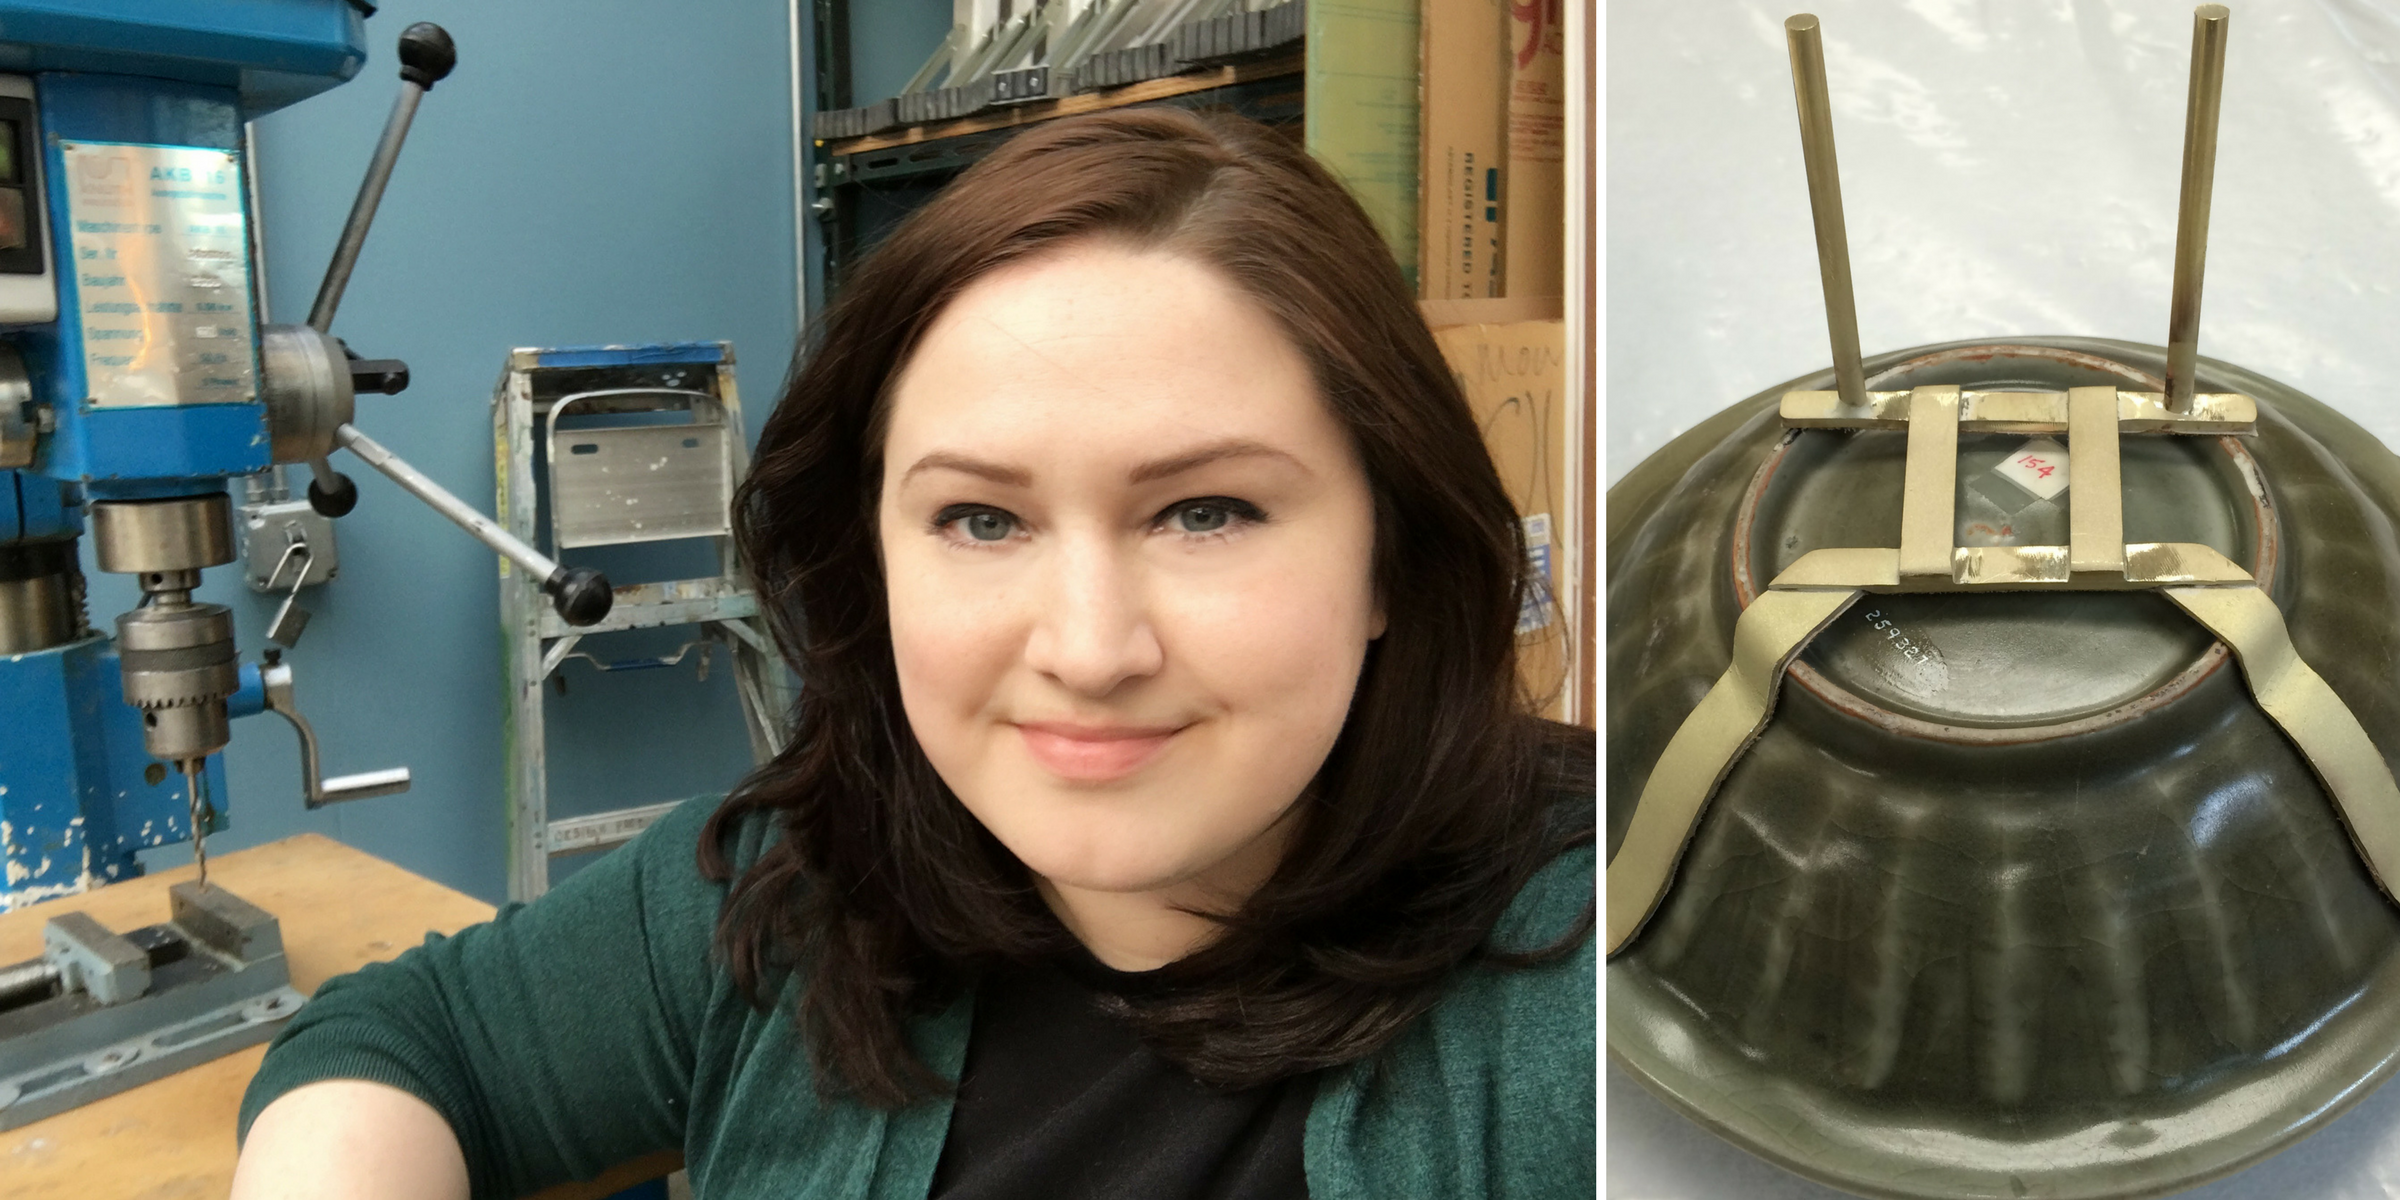 Two photos side-by-side: A women sitting in front of a large drill, and a bowl with a gold bracket attached to it, for display